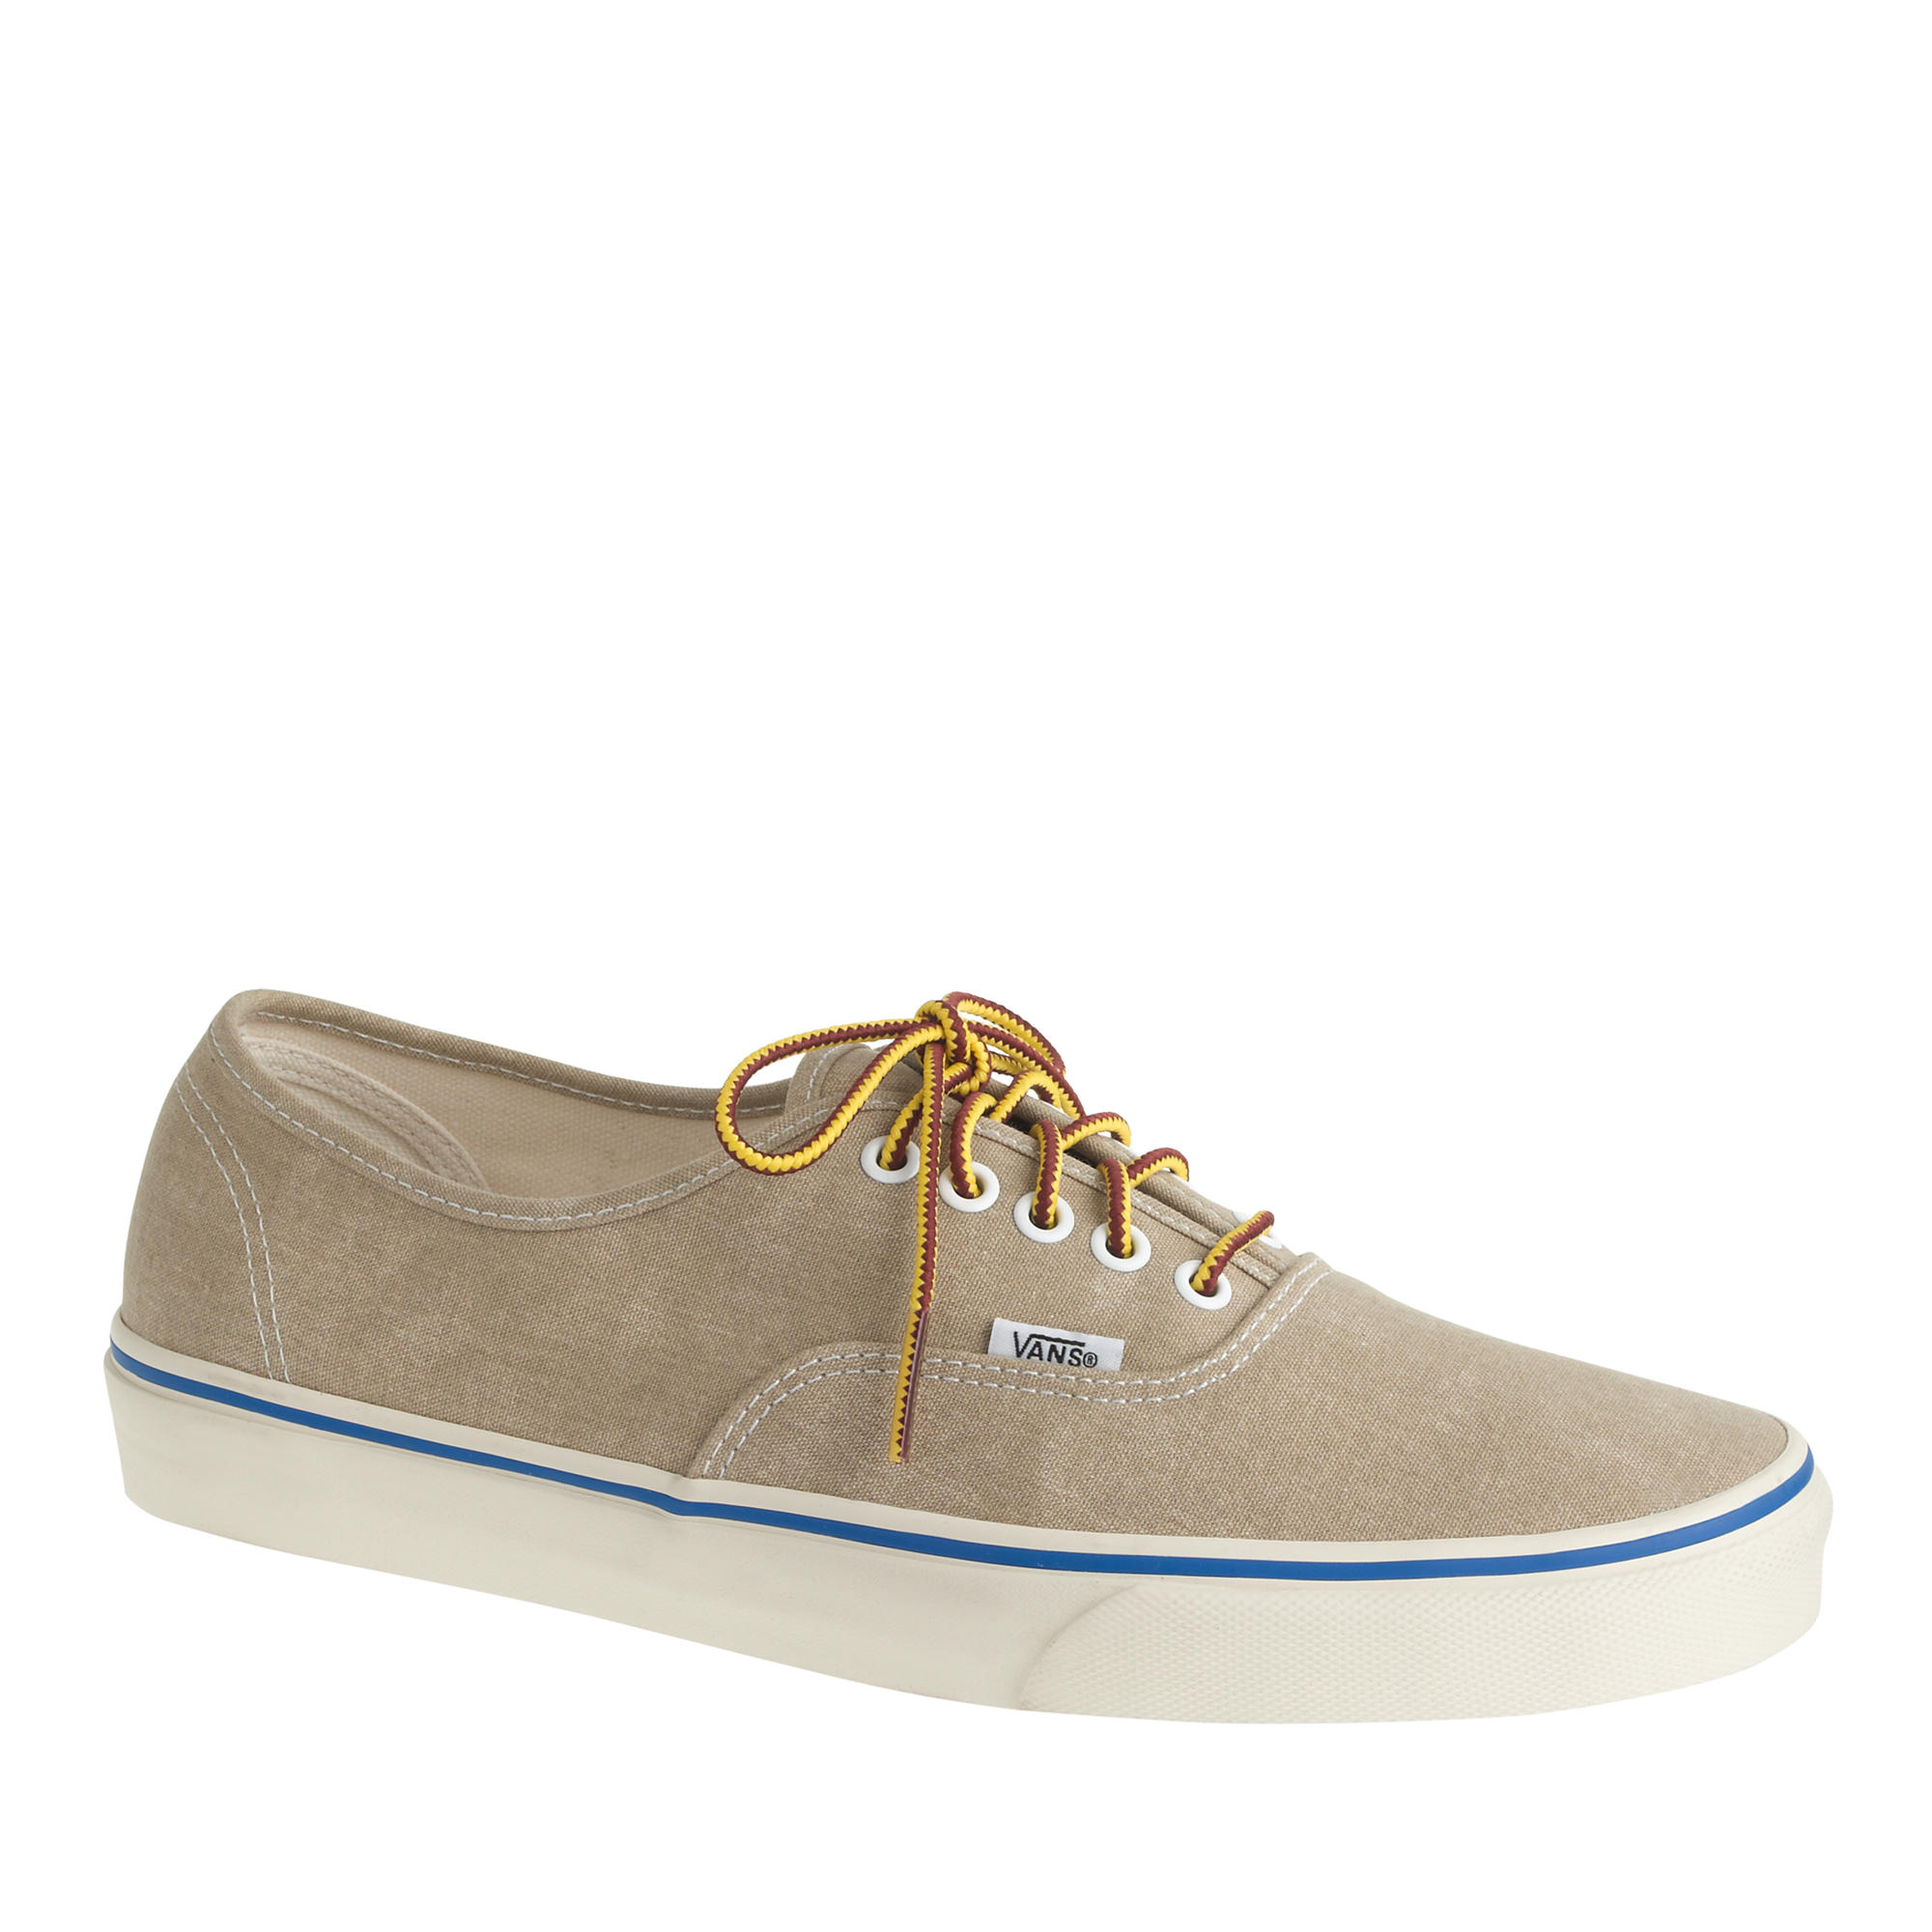 J.Crew Vans Washed Canvas Authentic Sneakers in Natural for Men - Lyst